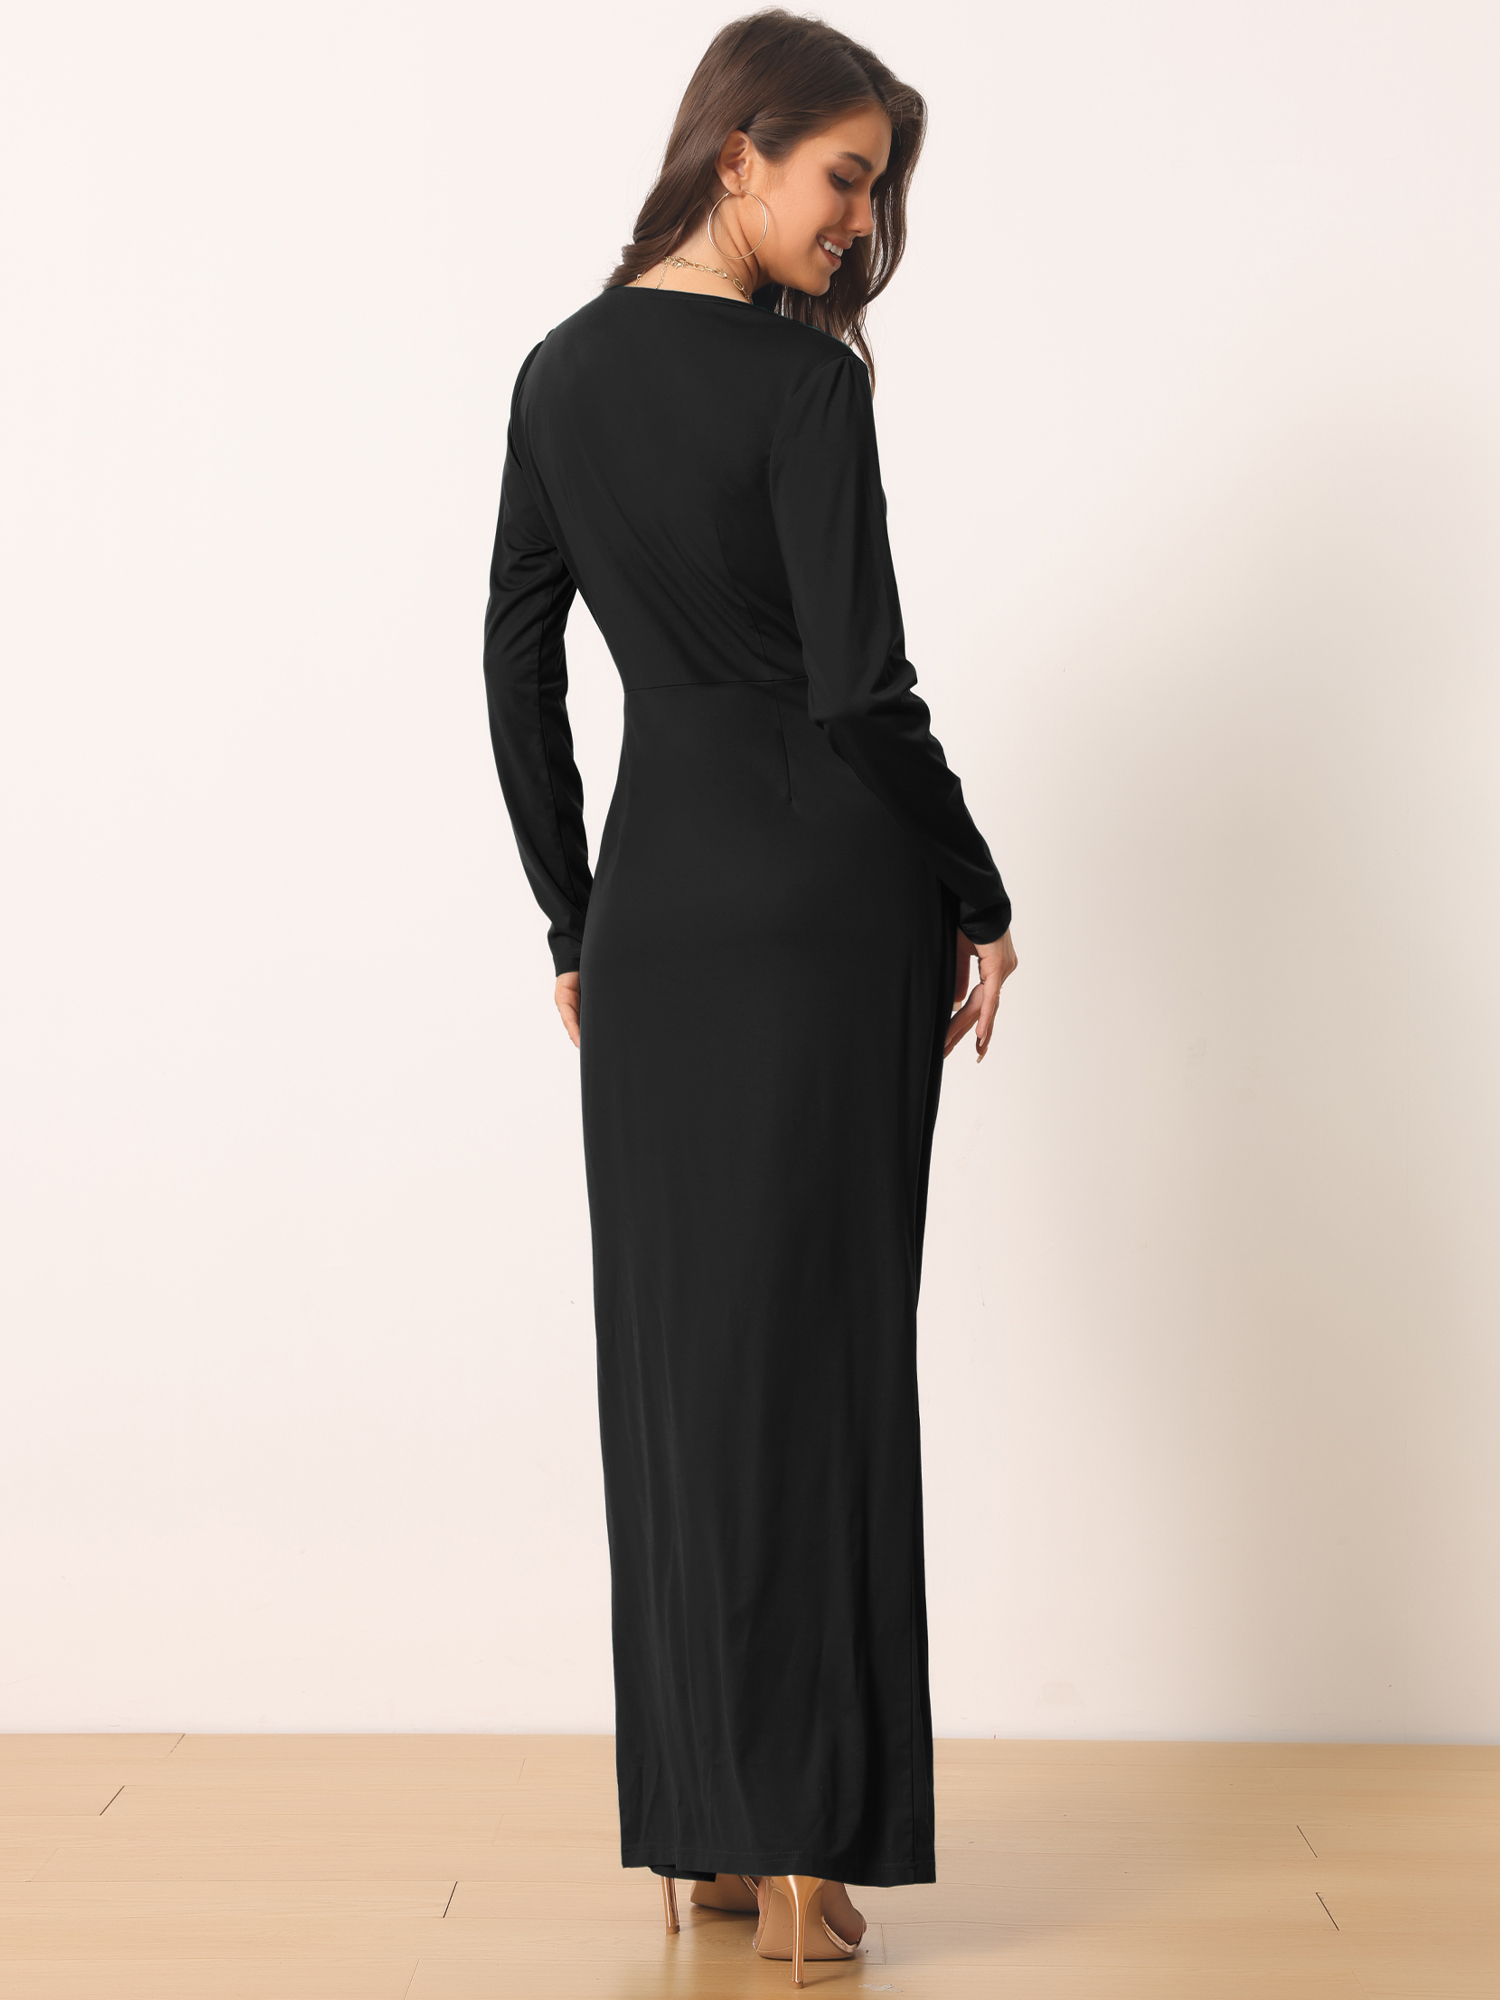 Unique Bargains Women's Long Sleeve Maxi Bodycon Dresses V Neck Draped Front Ruched Cocktail Party Dress with Slit